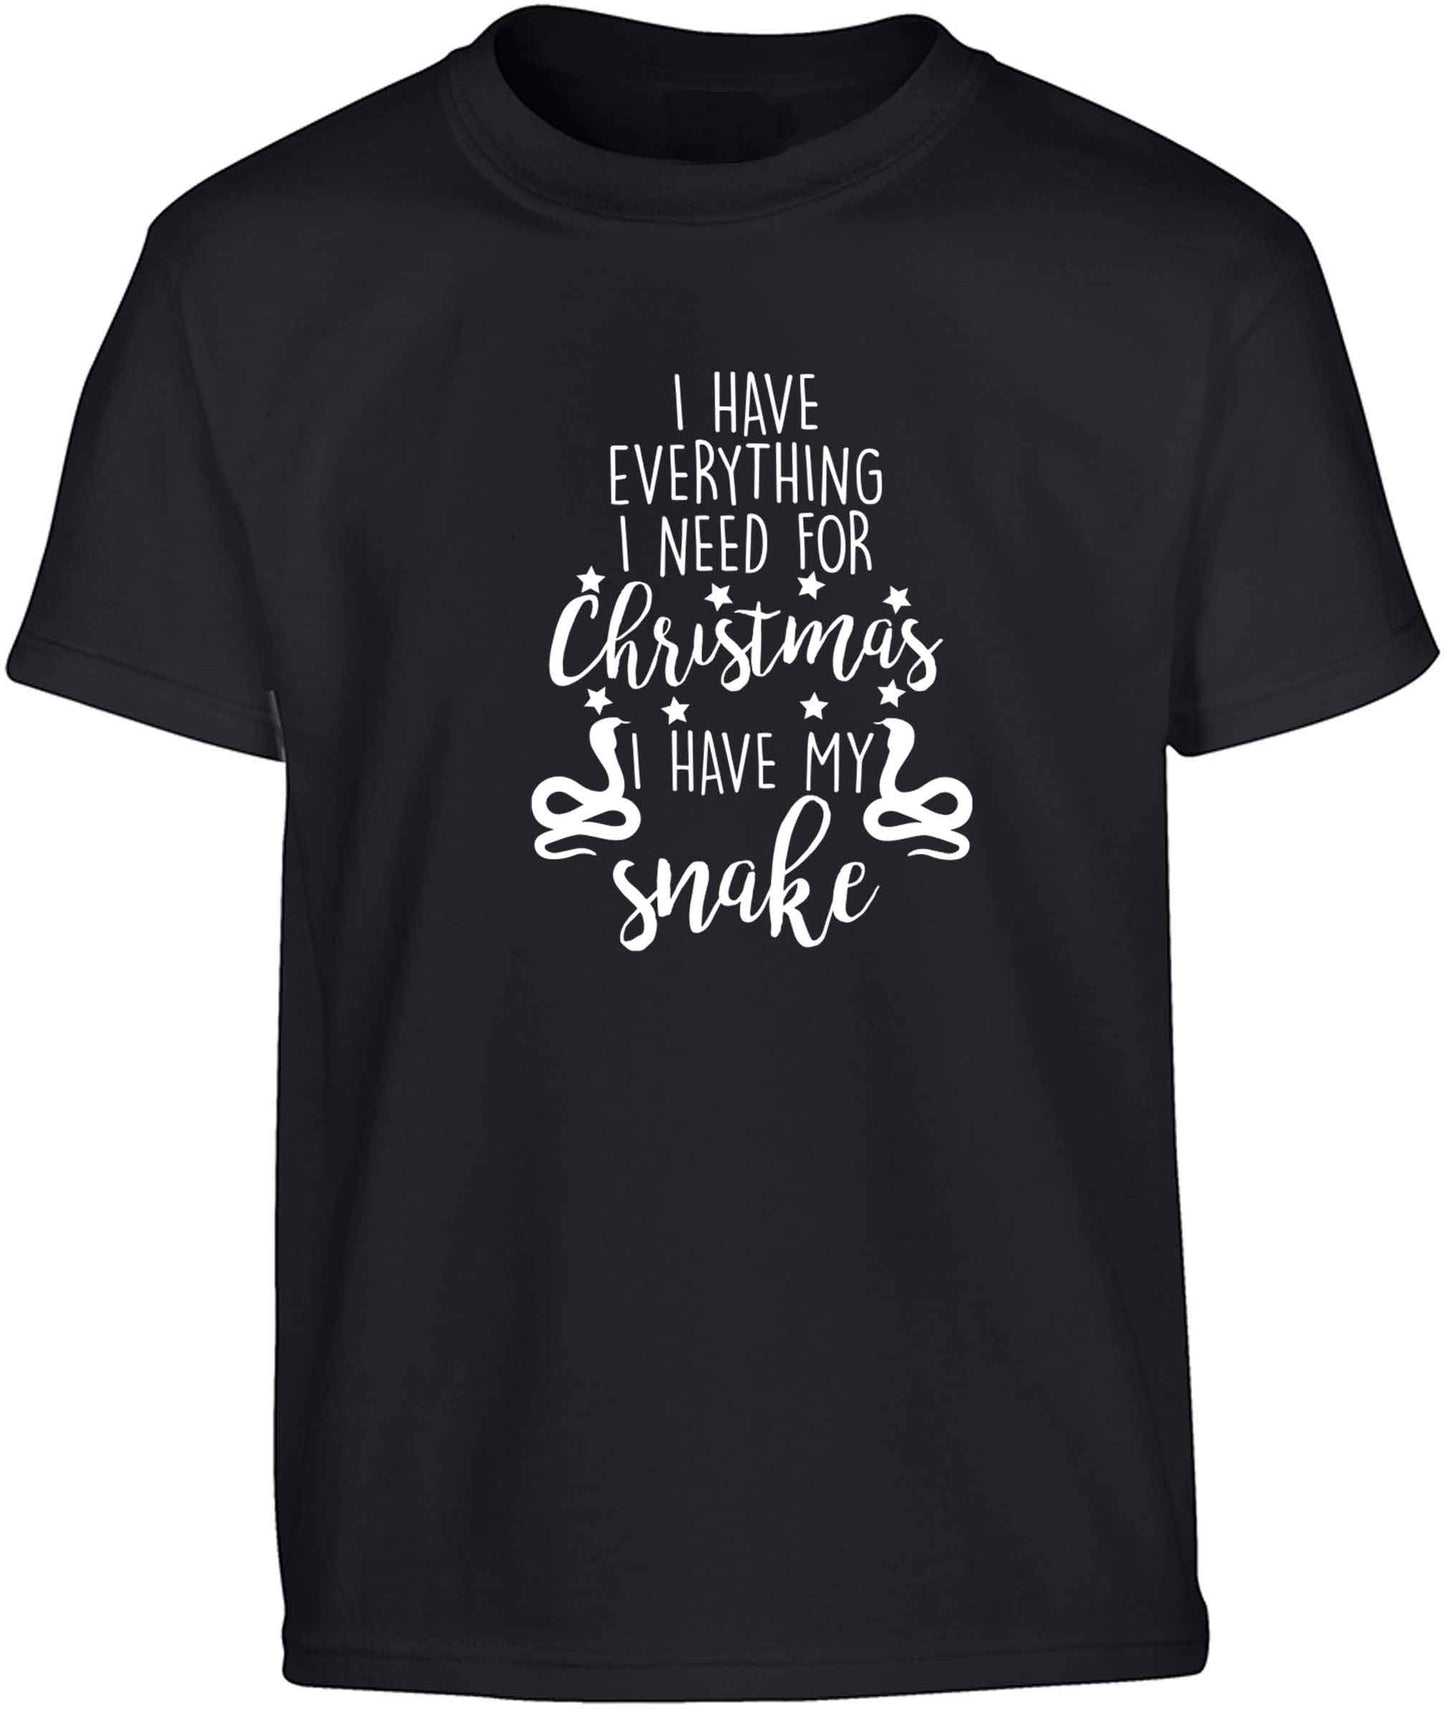 I have everything I need for Christmas I have my snake Children's black Tshirt 12-13 Years